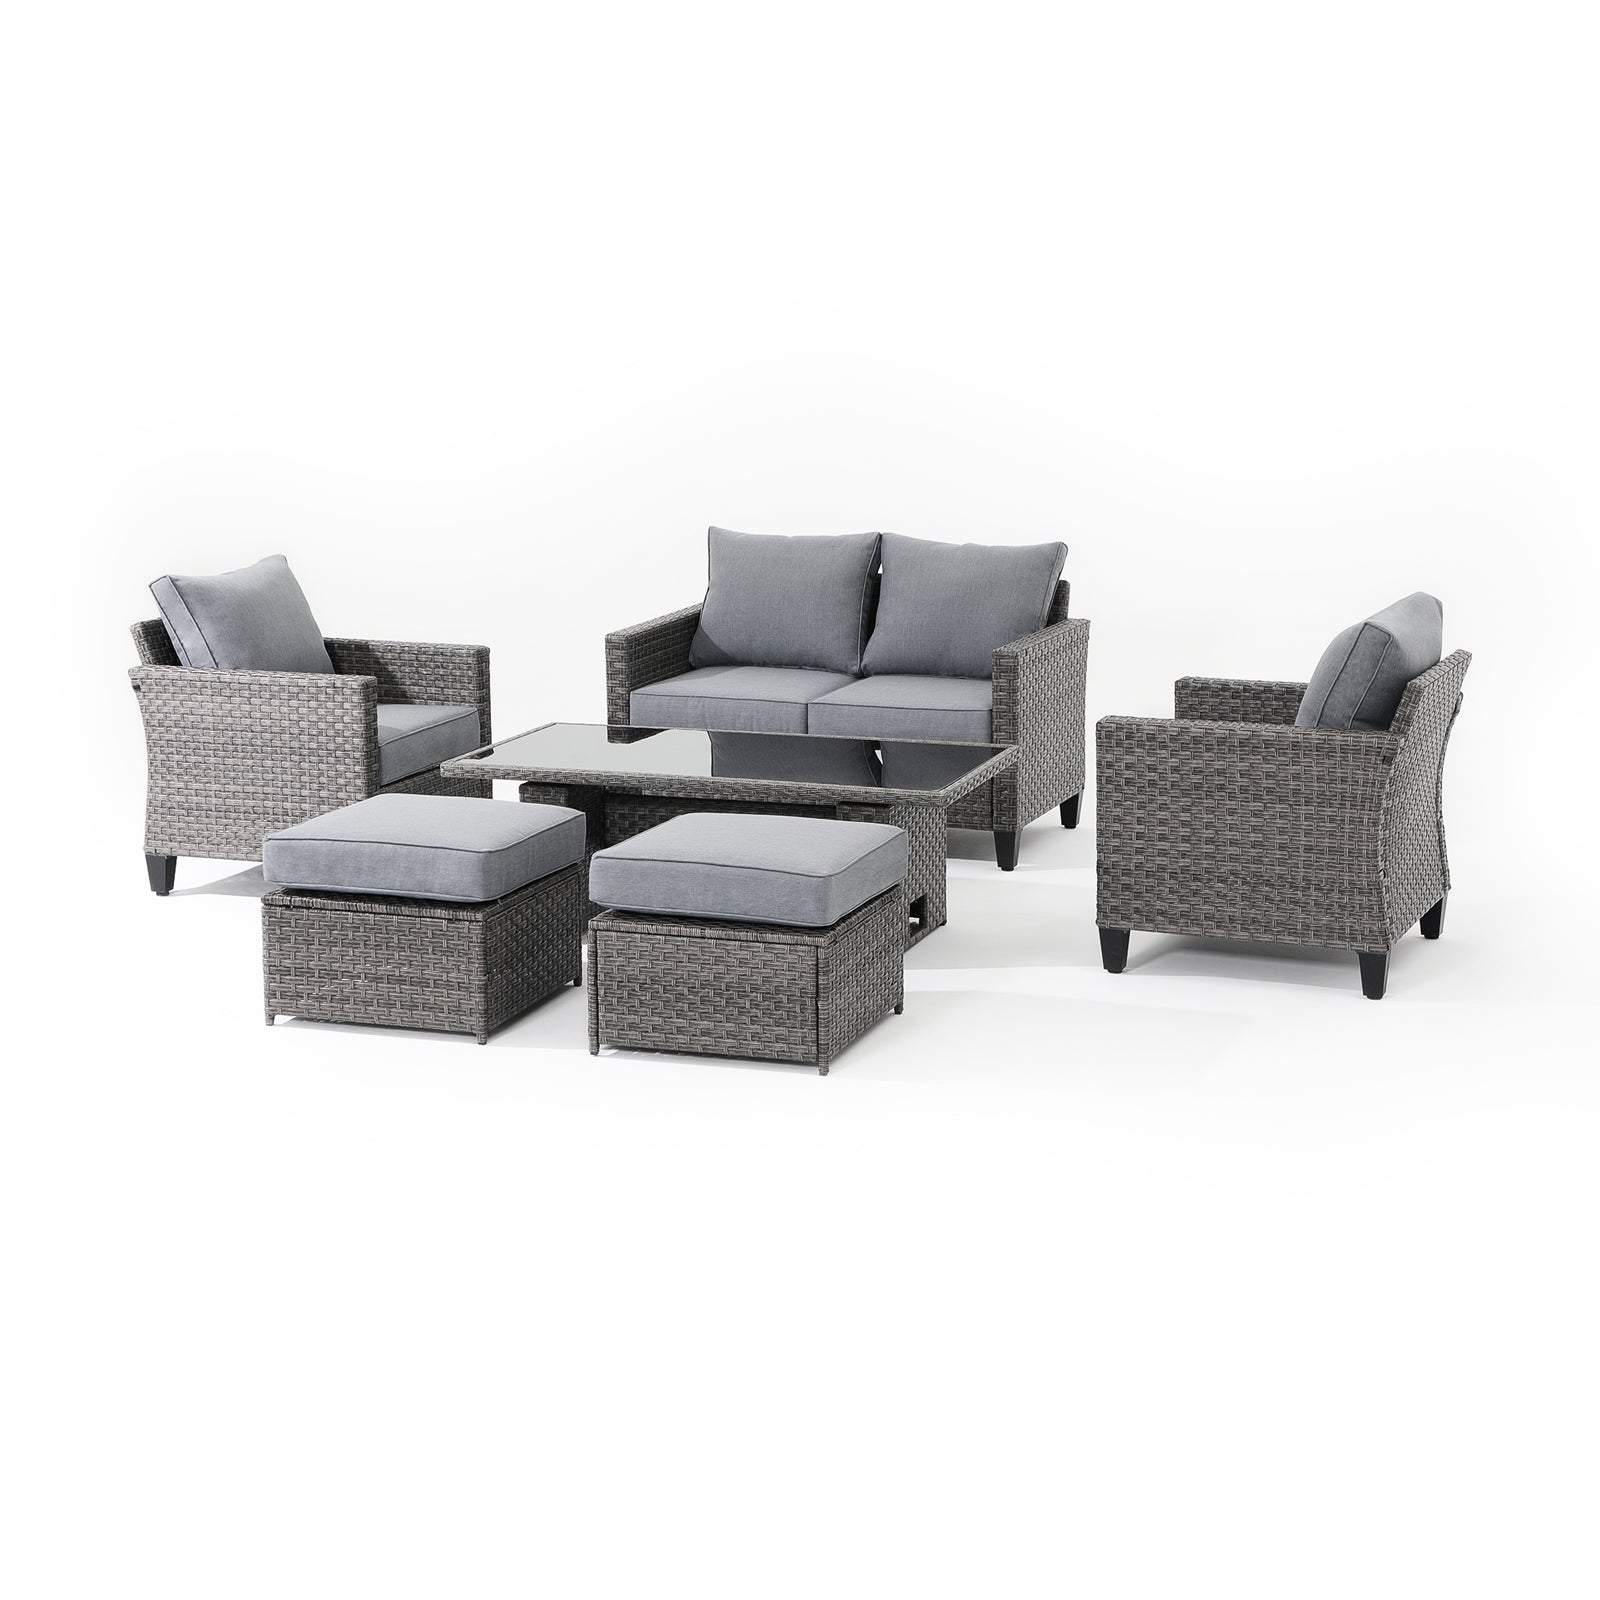 Ayia 6 piece outdoor seating set,wicker design, grey cushions-Jardina furniture #color_Grey#piece_6-pc. with Ottomans